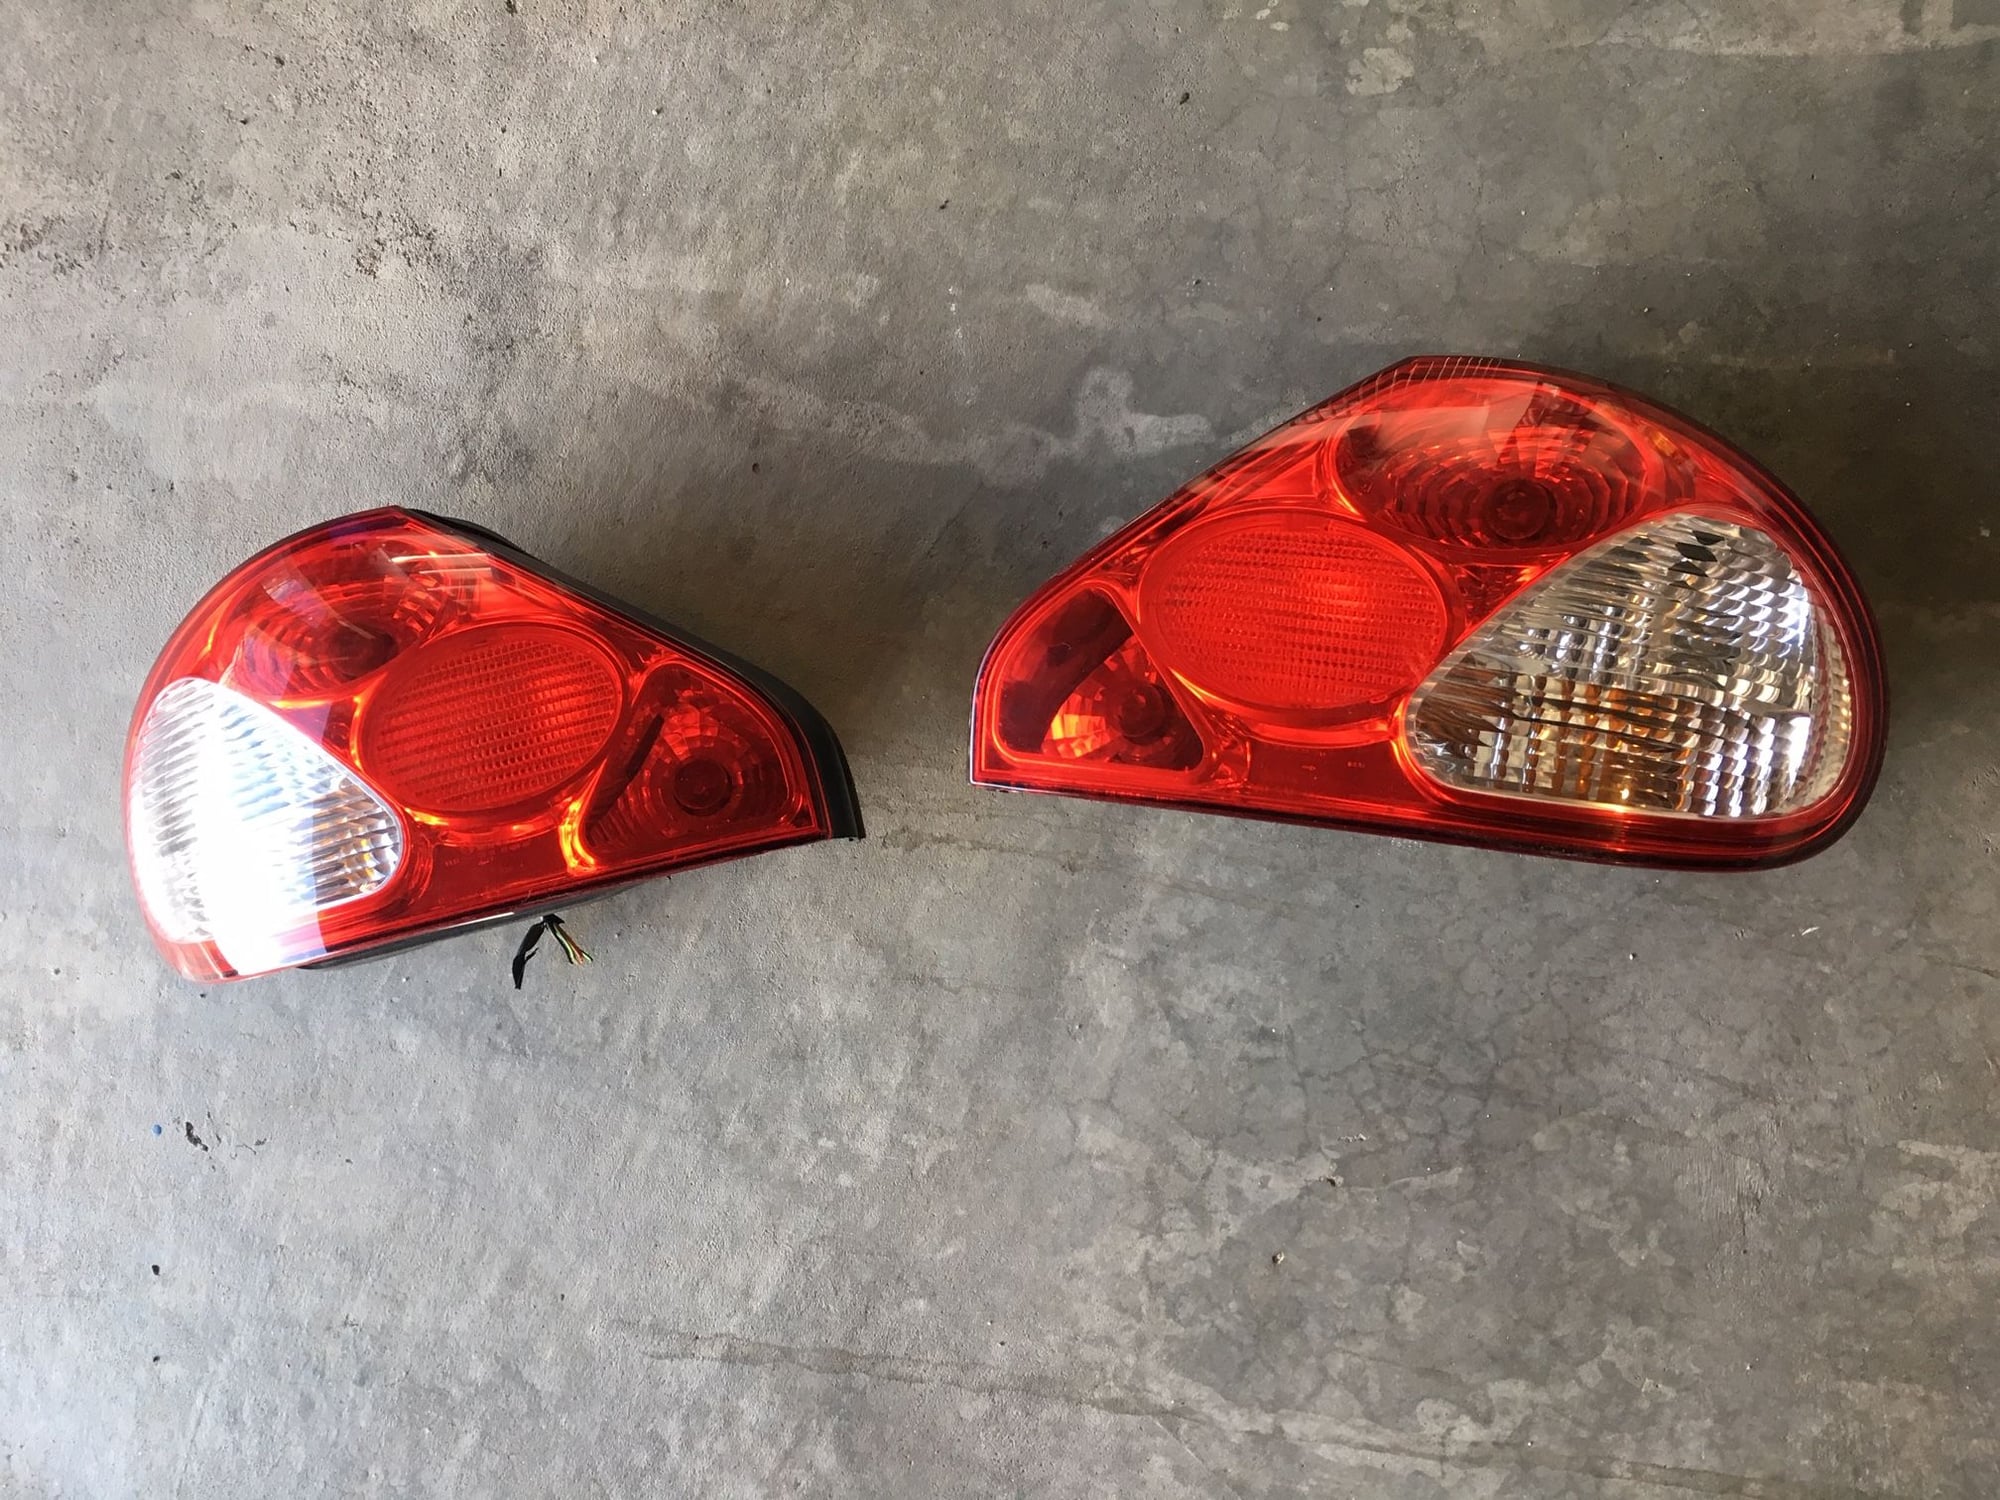 Lights - Taillights from a 2006 X-Type $45 each - Used - 2001 to 2008 Jaguar X-Type - Littleton, CO 80125, United States